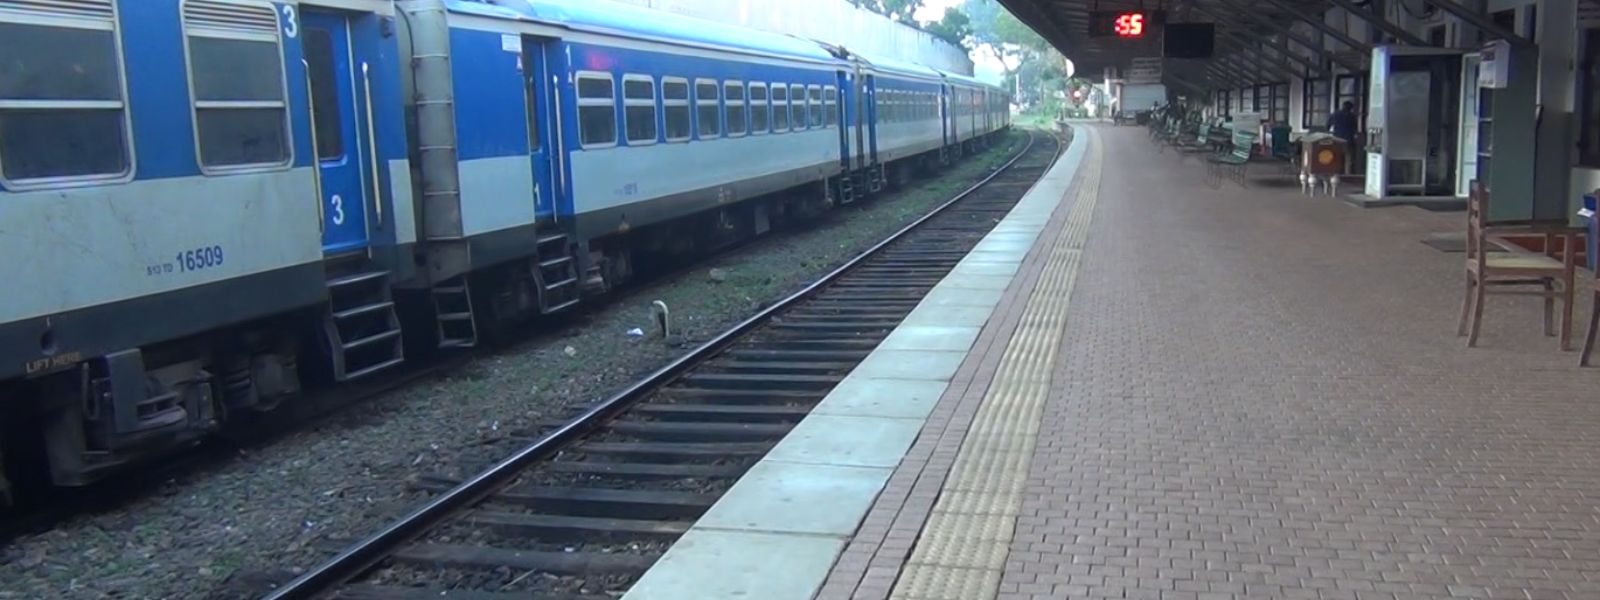 Train Stations empty as strike cripples operations